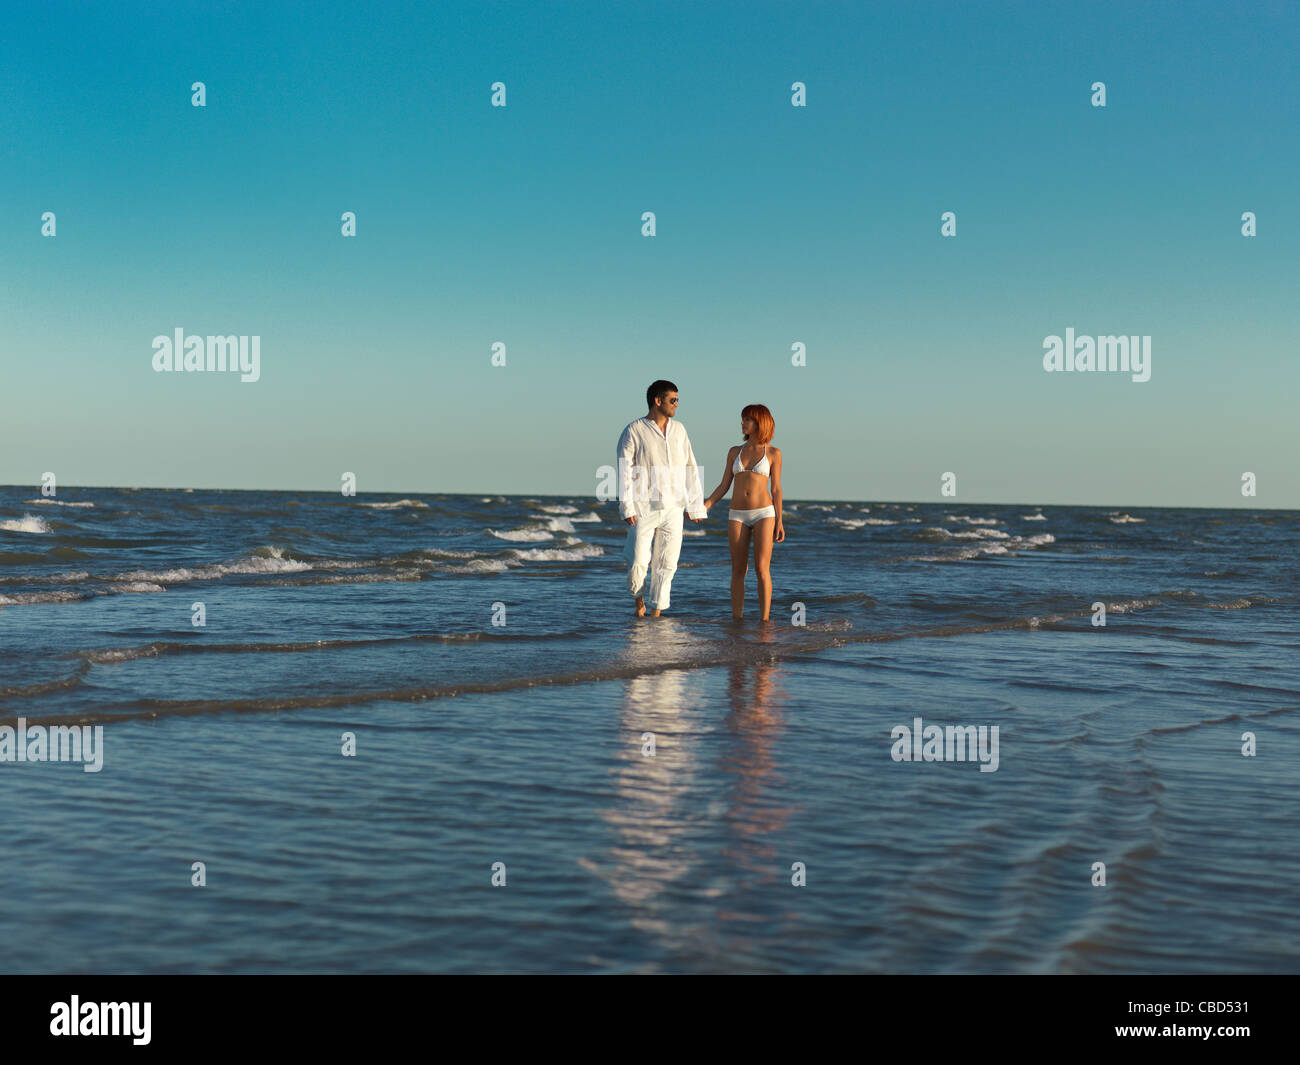 happy, young couple, dressed in white, walking in the water by the sea shore, holding hands Stock Photo